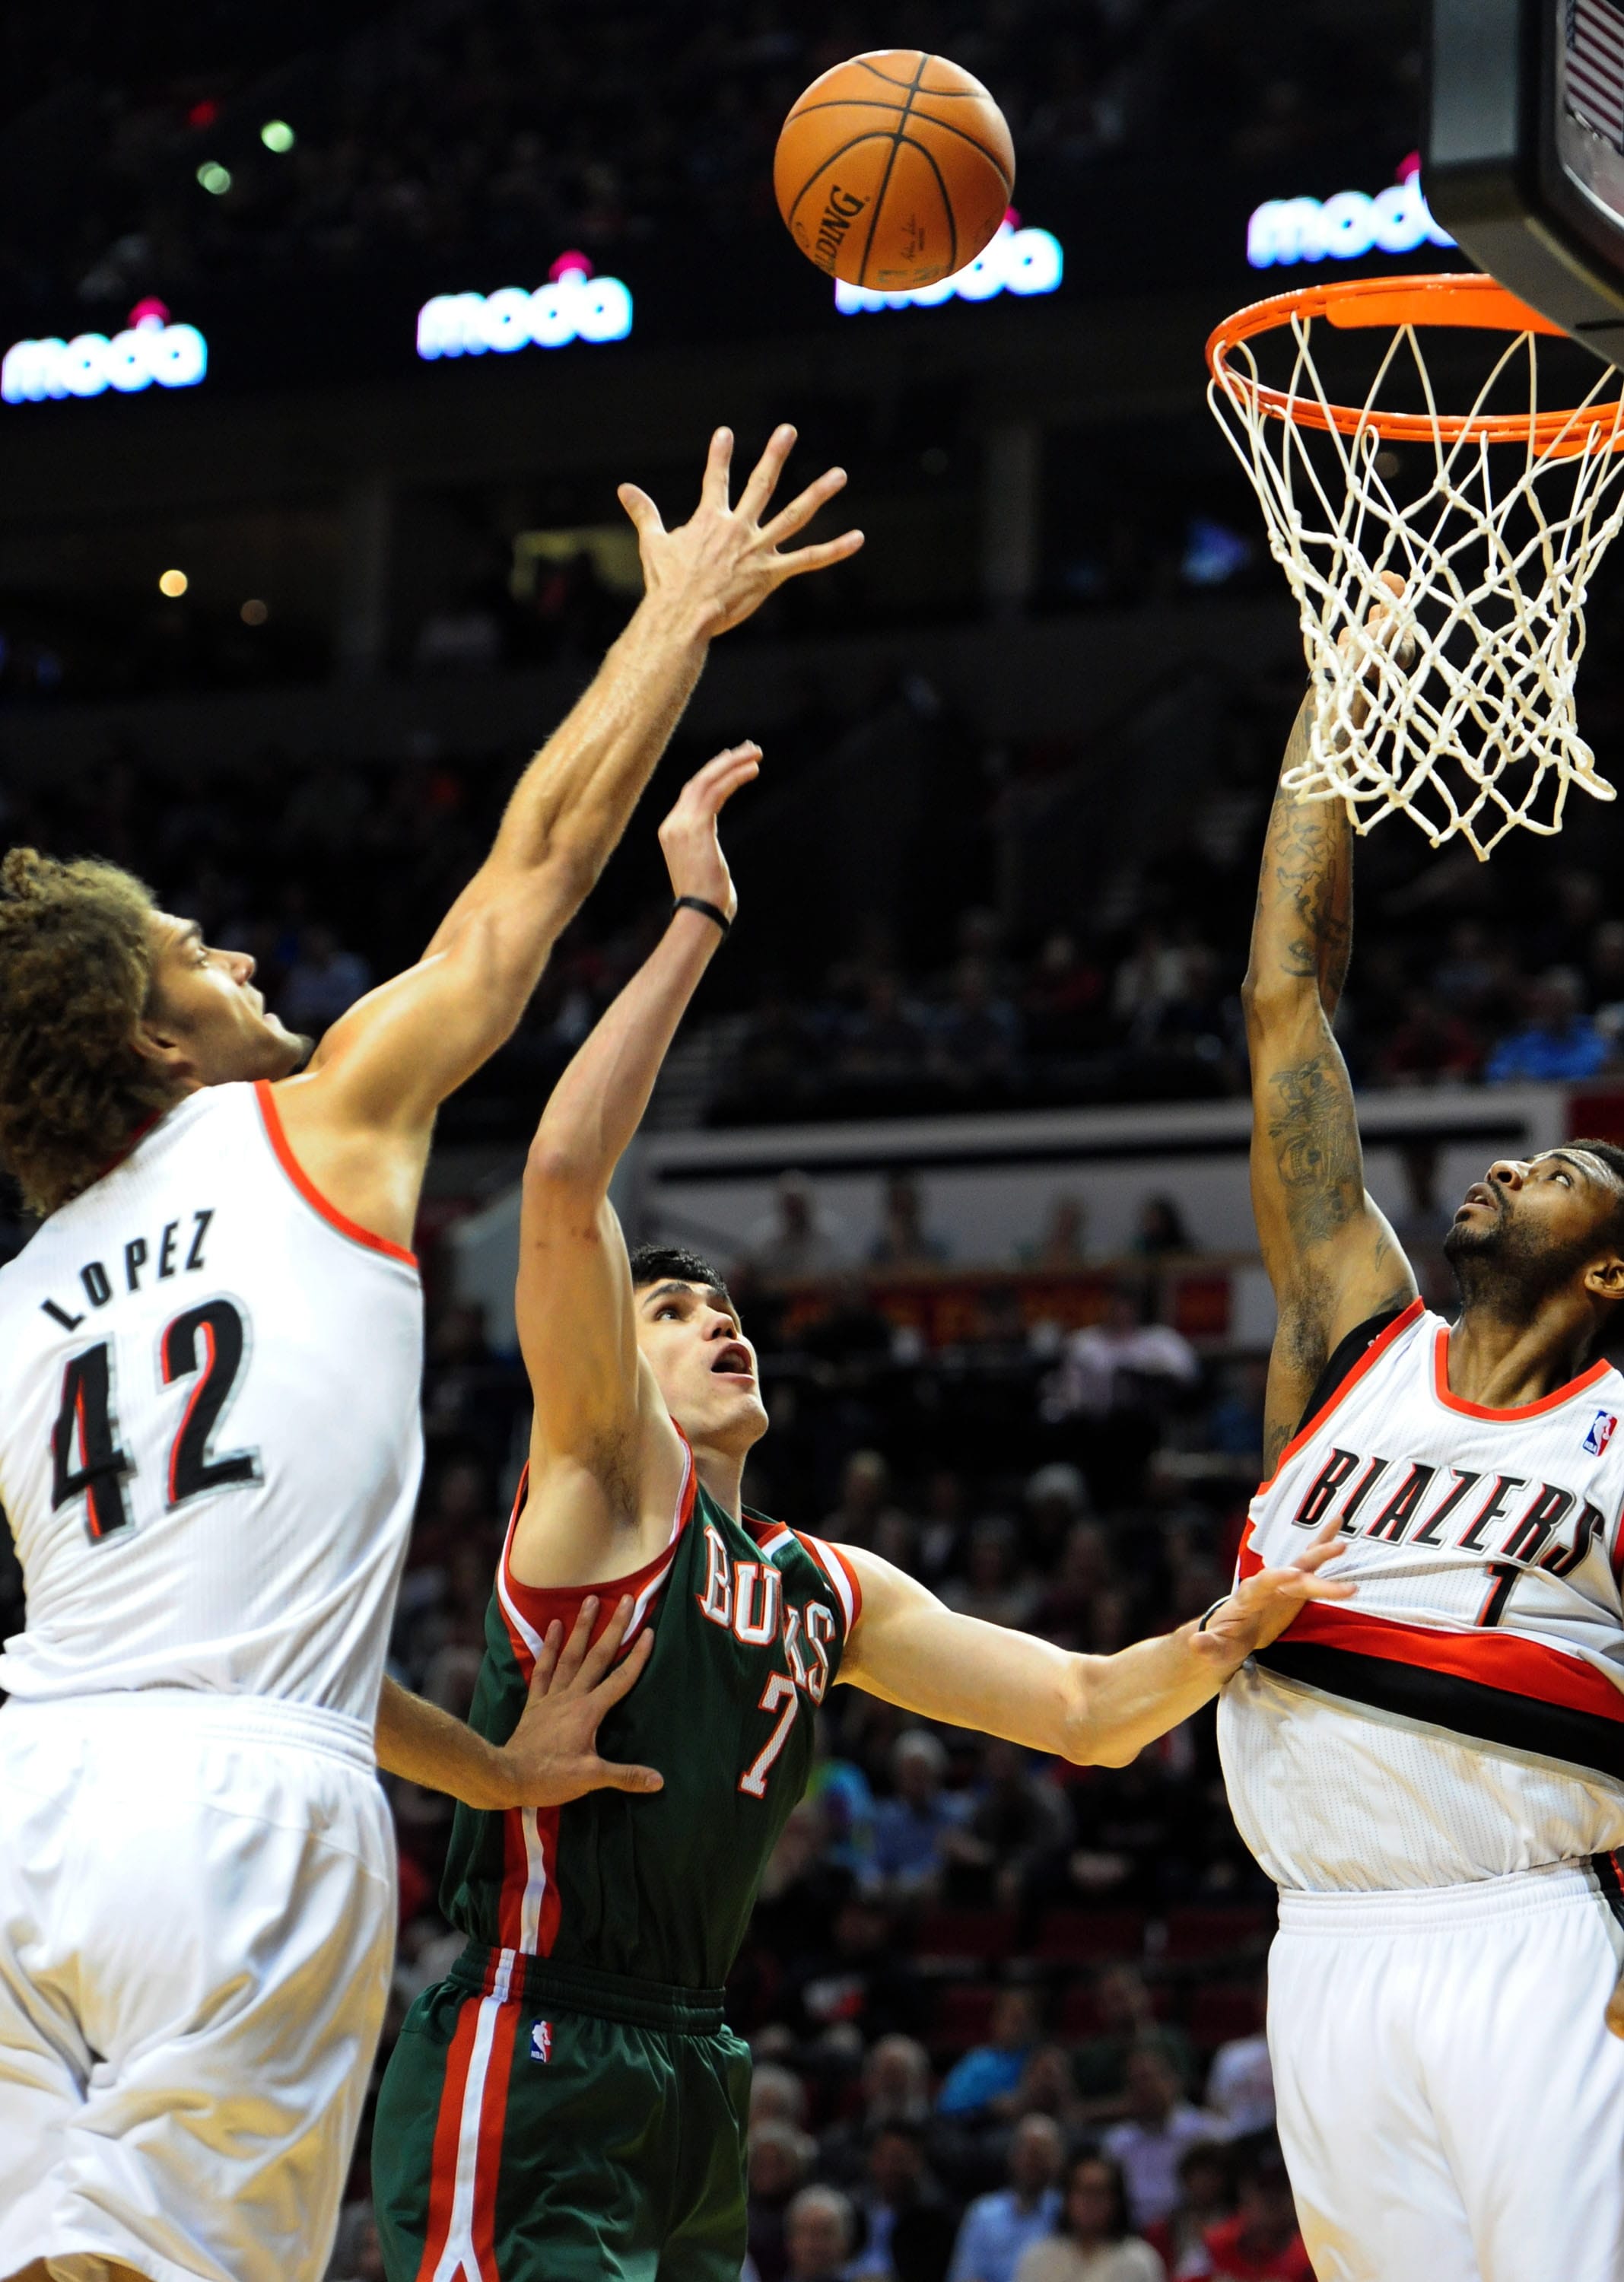 Milwaukee Bucks forward Ersan Ilyasova (7) drives to the basket on Portland Trail Blazers center Robin Lopez (42) and forward Dorell Wright (1) during the first half of an NBA basketball game in Portland, Ore., Tuesday, March 18, 2014.